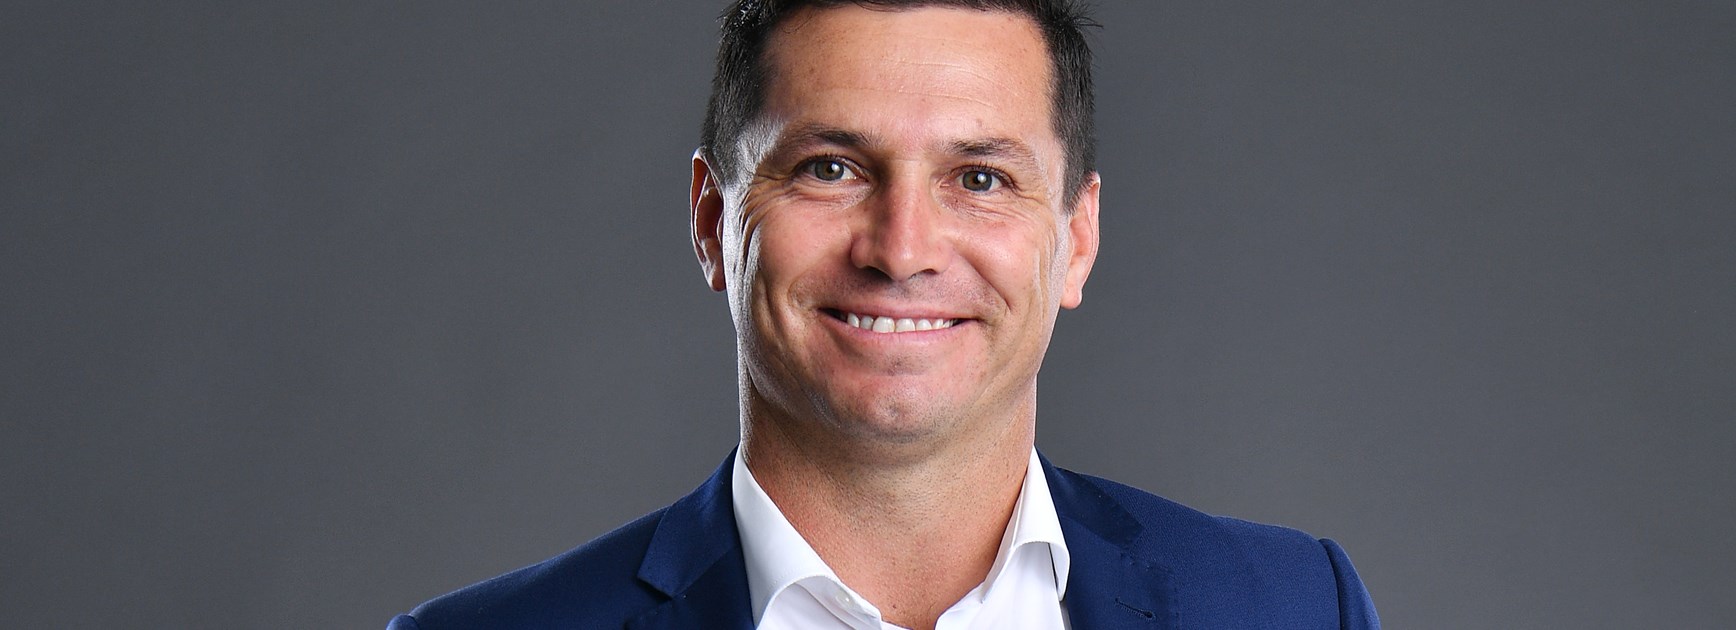 New NRL Touch Football CEO appointed